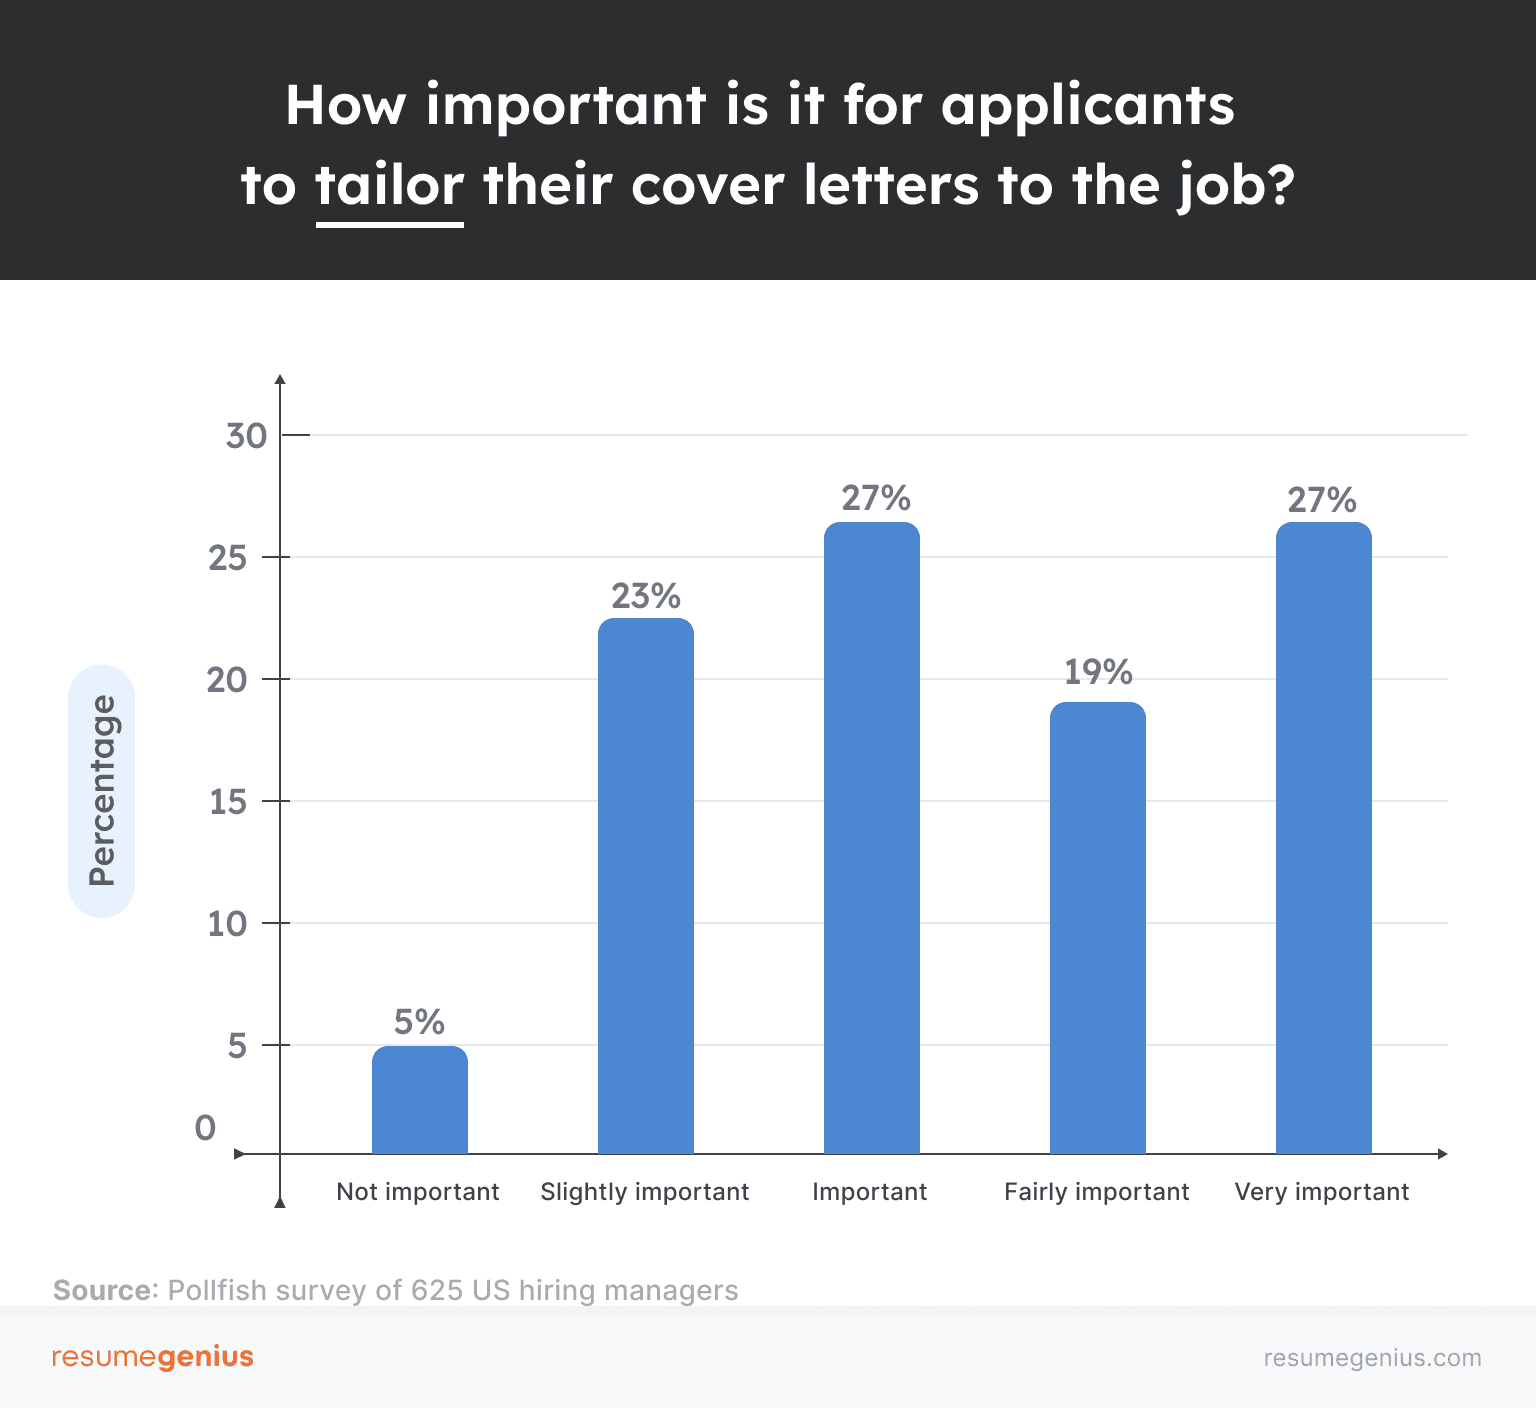 Hiring managers separated by how important they consider customizing a cover letter to be when applying for a job